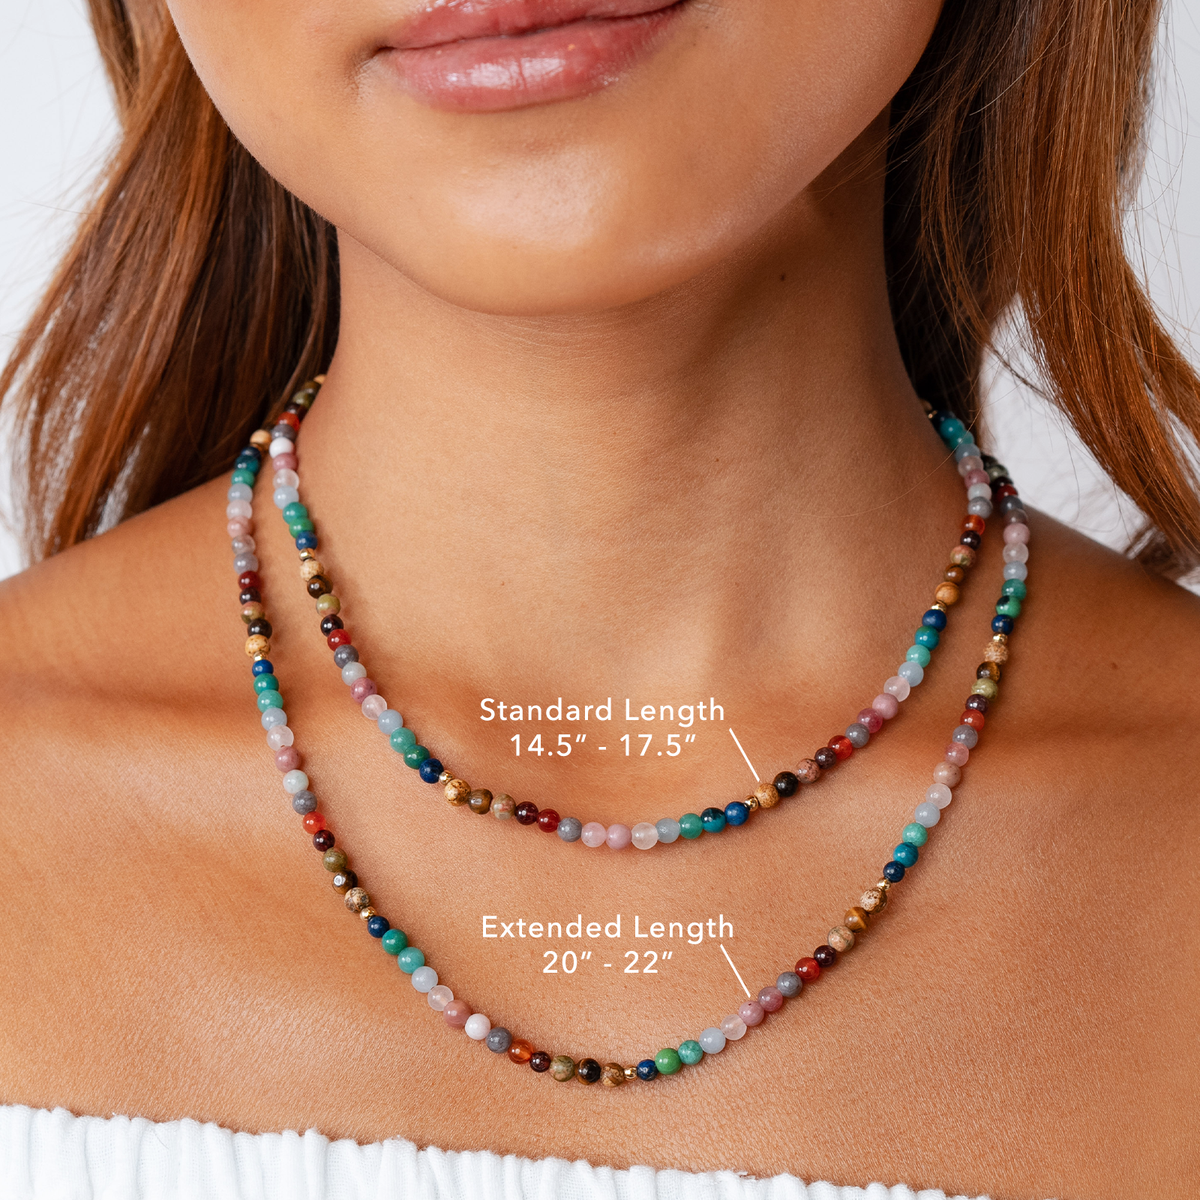 Model wearing two versions of a 4mm multicolor necklace. One is the standard length that ranges from 14.5&quot; to 17.5&quot; and the other is the extended length version that ranges from 20&quot; to 22&quot;